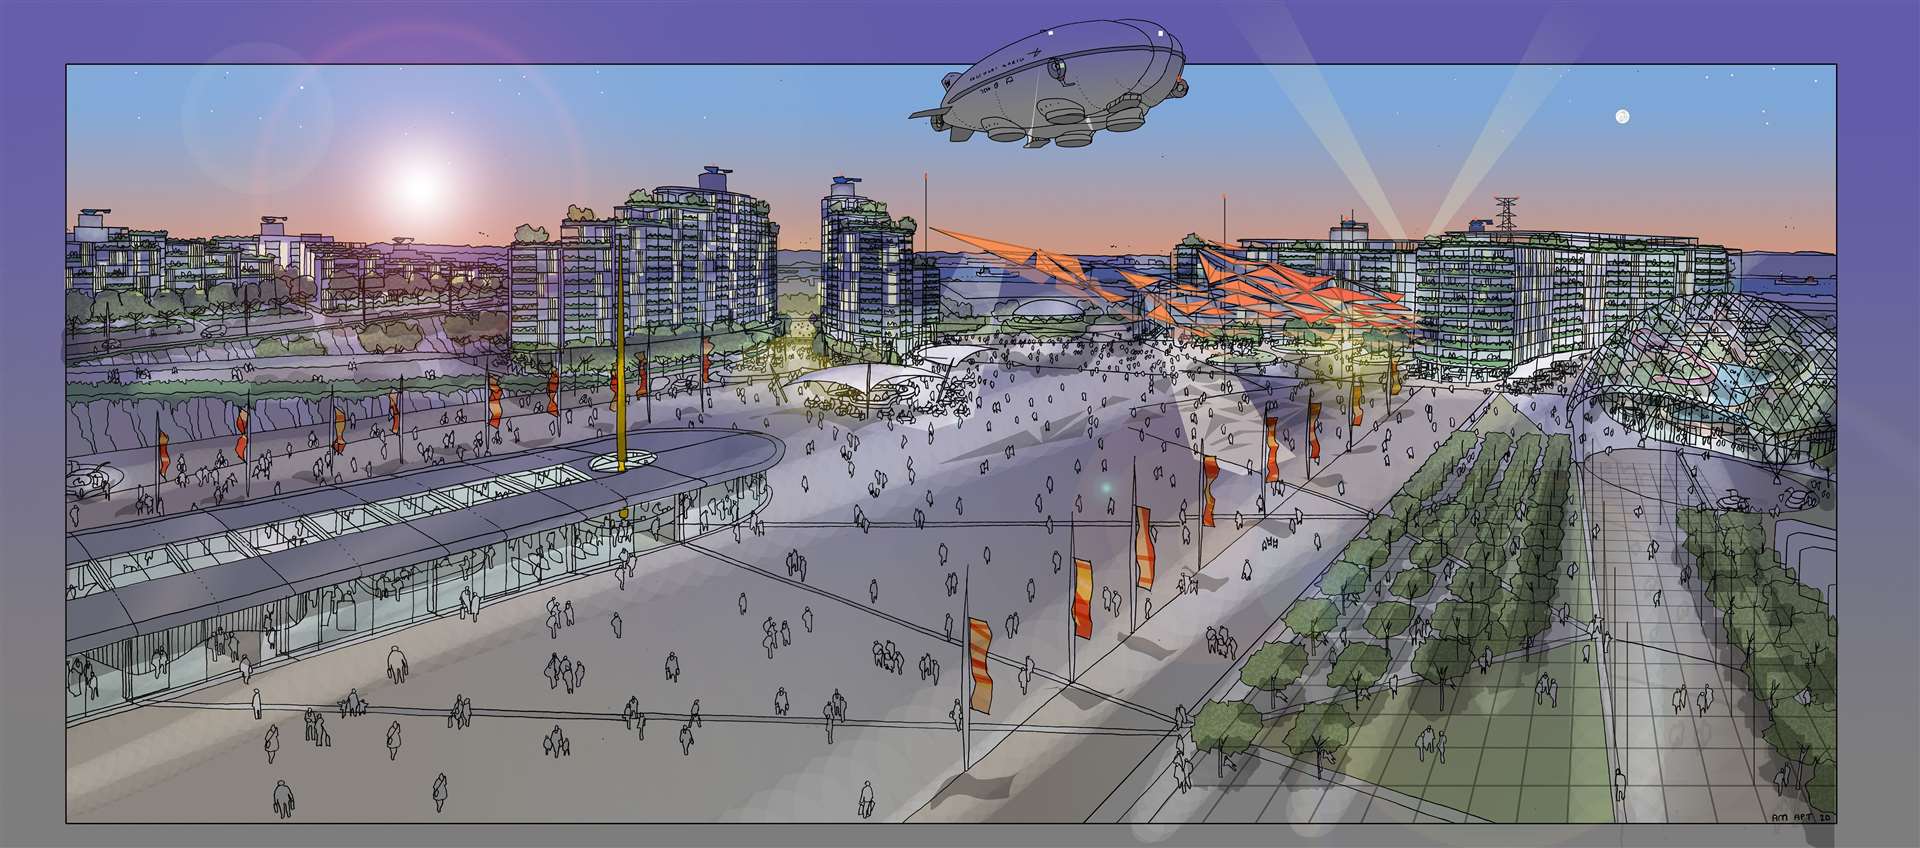 An artist impression of the Arrival Plaza, hotels and market. Picture: The London Resort